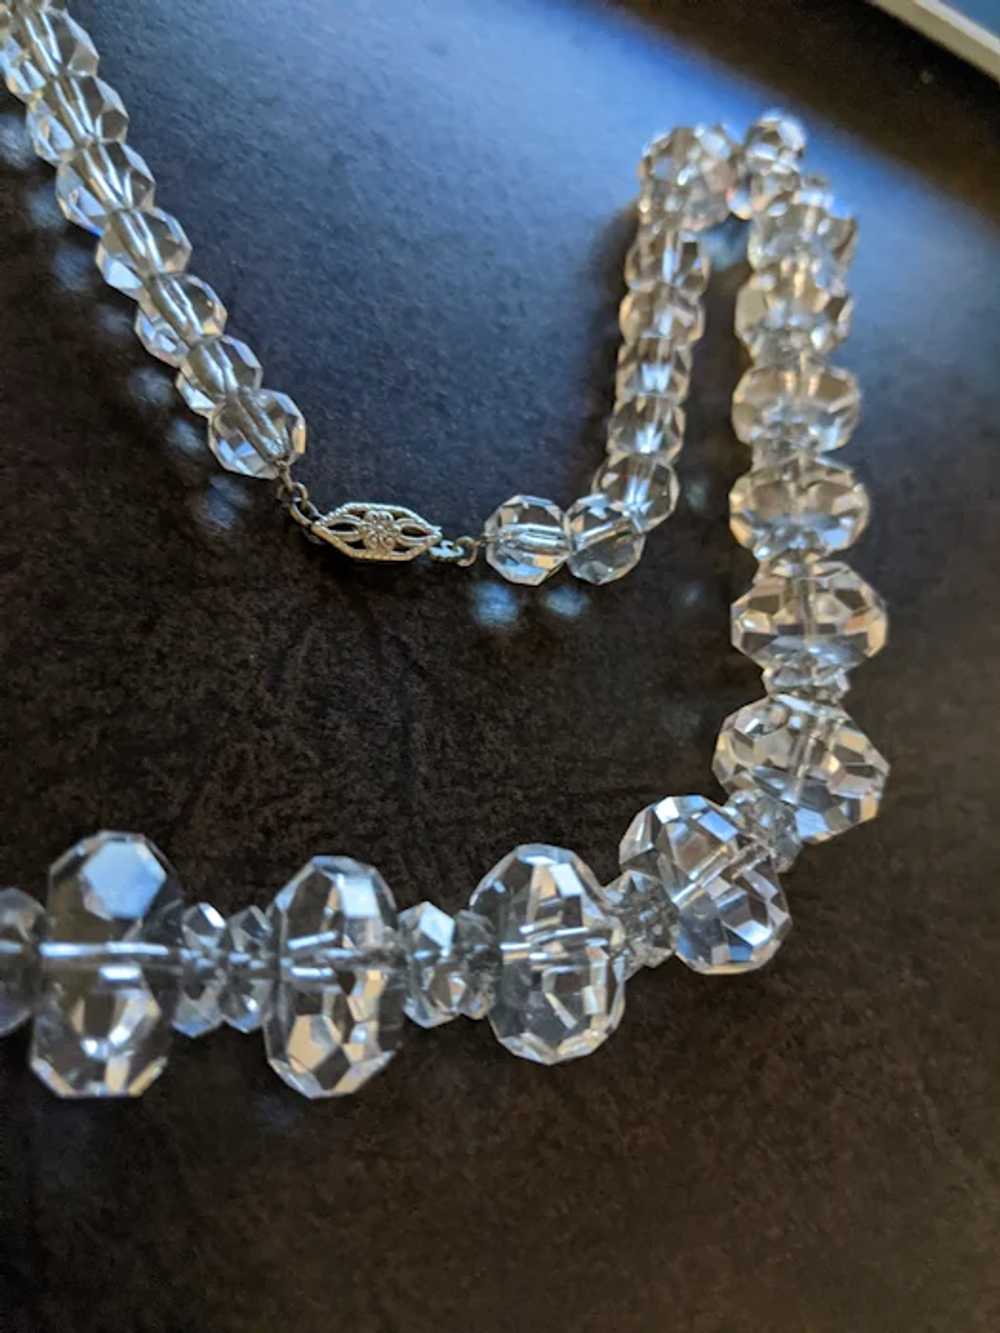 Vintage Faceted Rock Crystal Beads Necklace - image 2